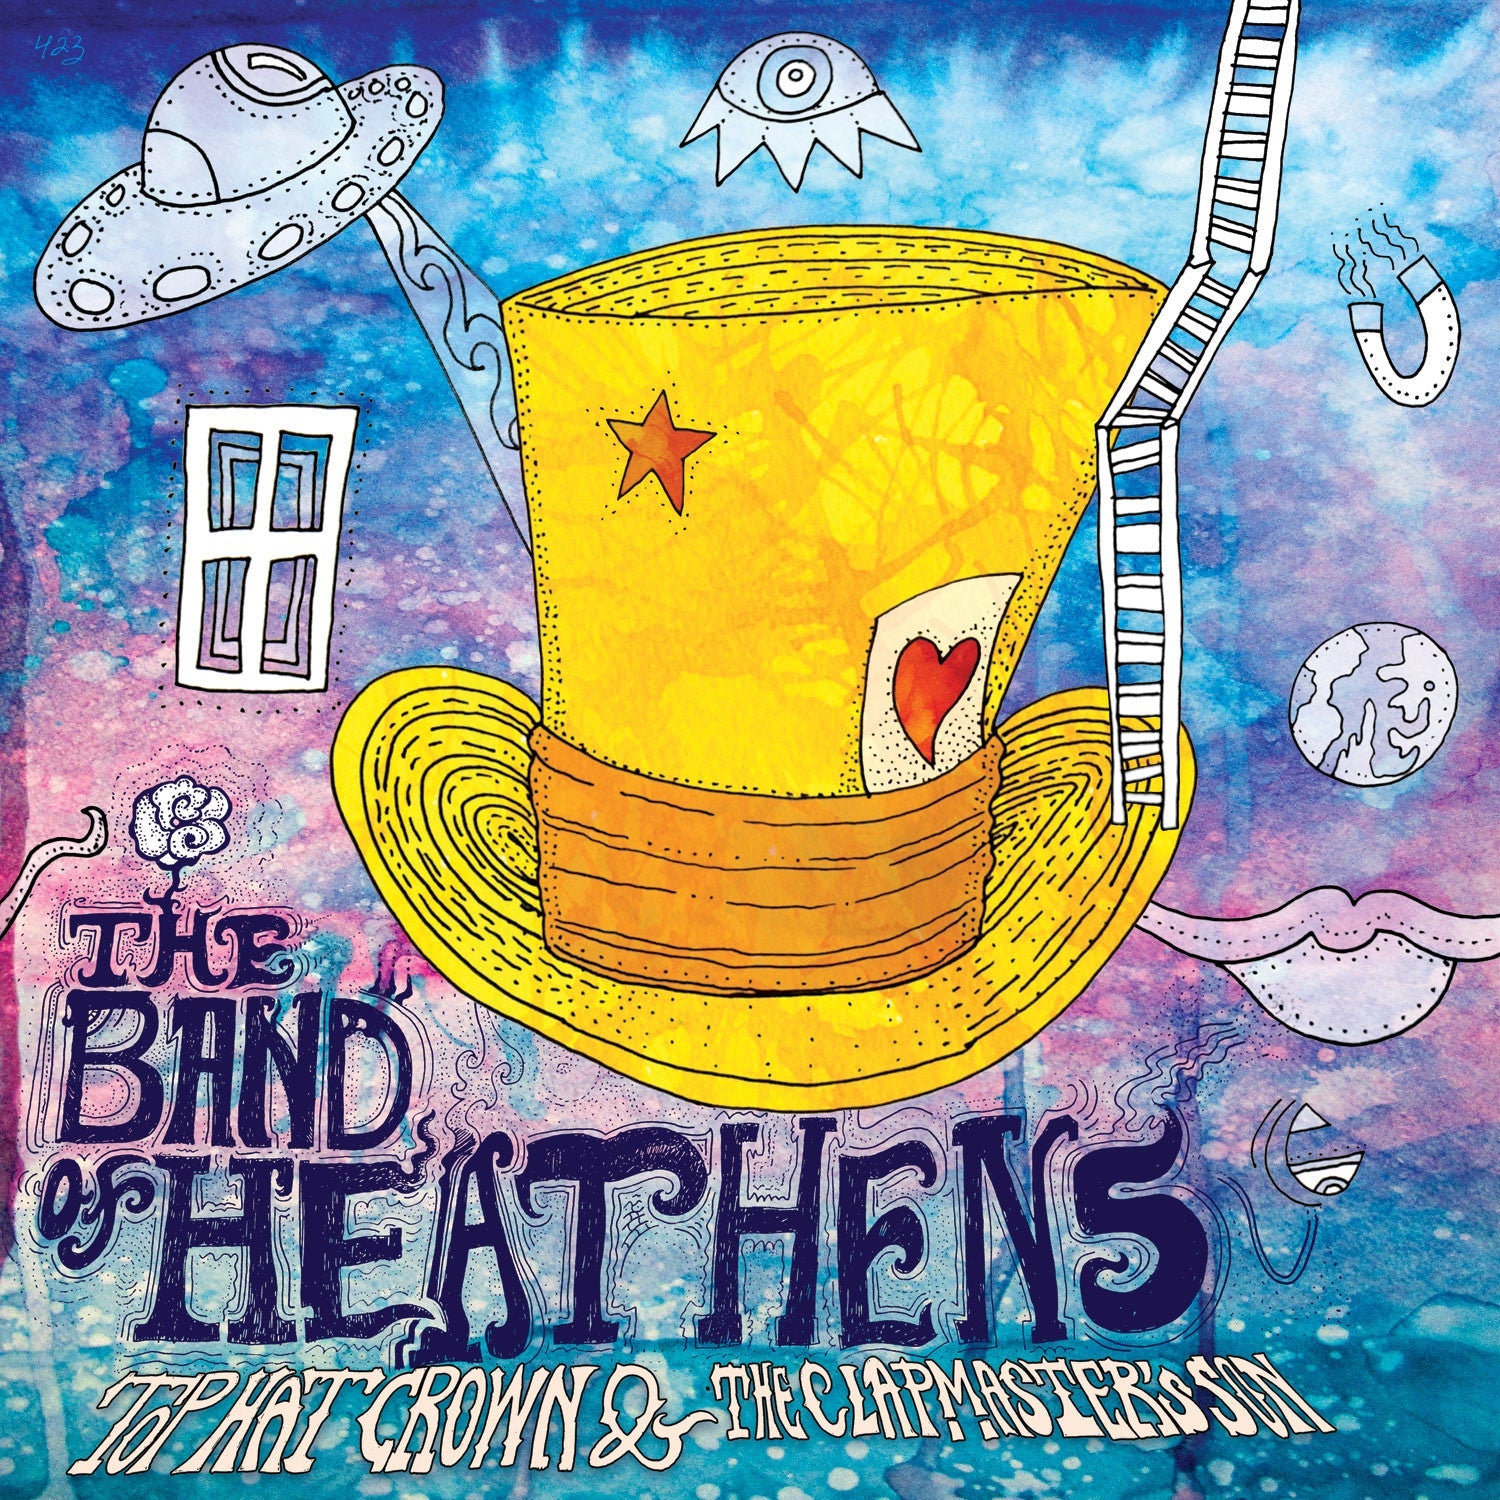 Top hat crown and the clap masters son CD The Band of Heathens 